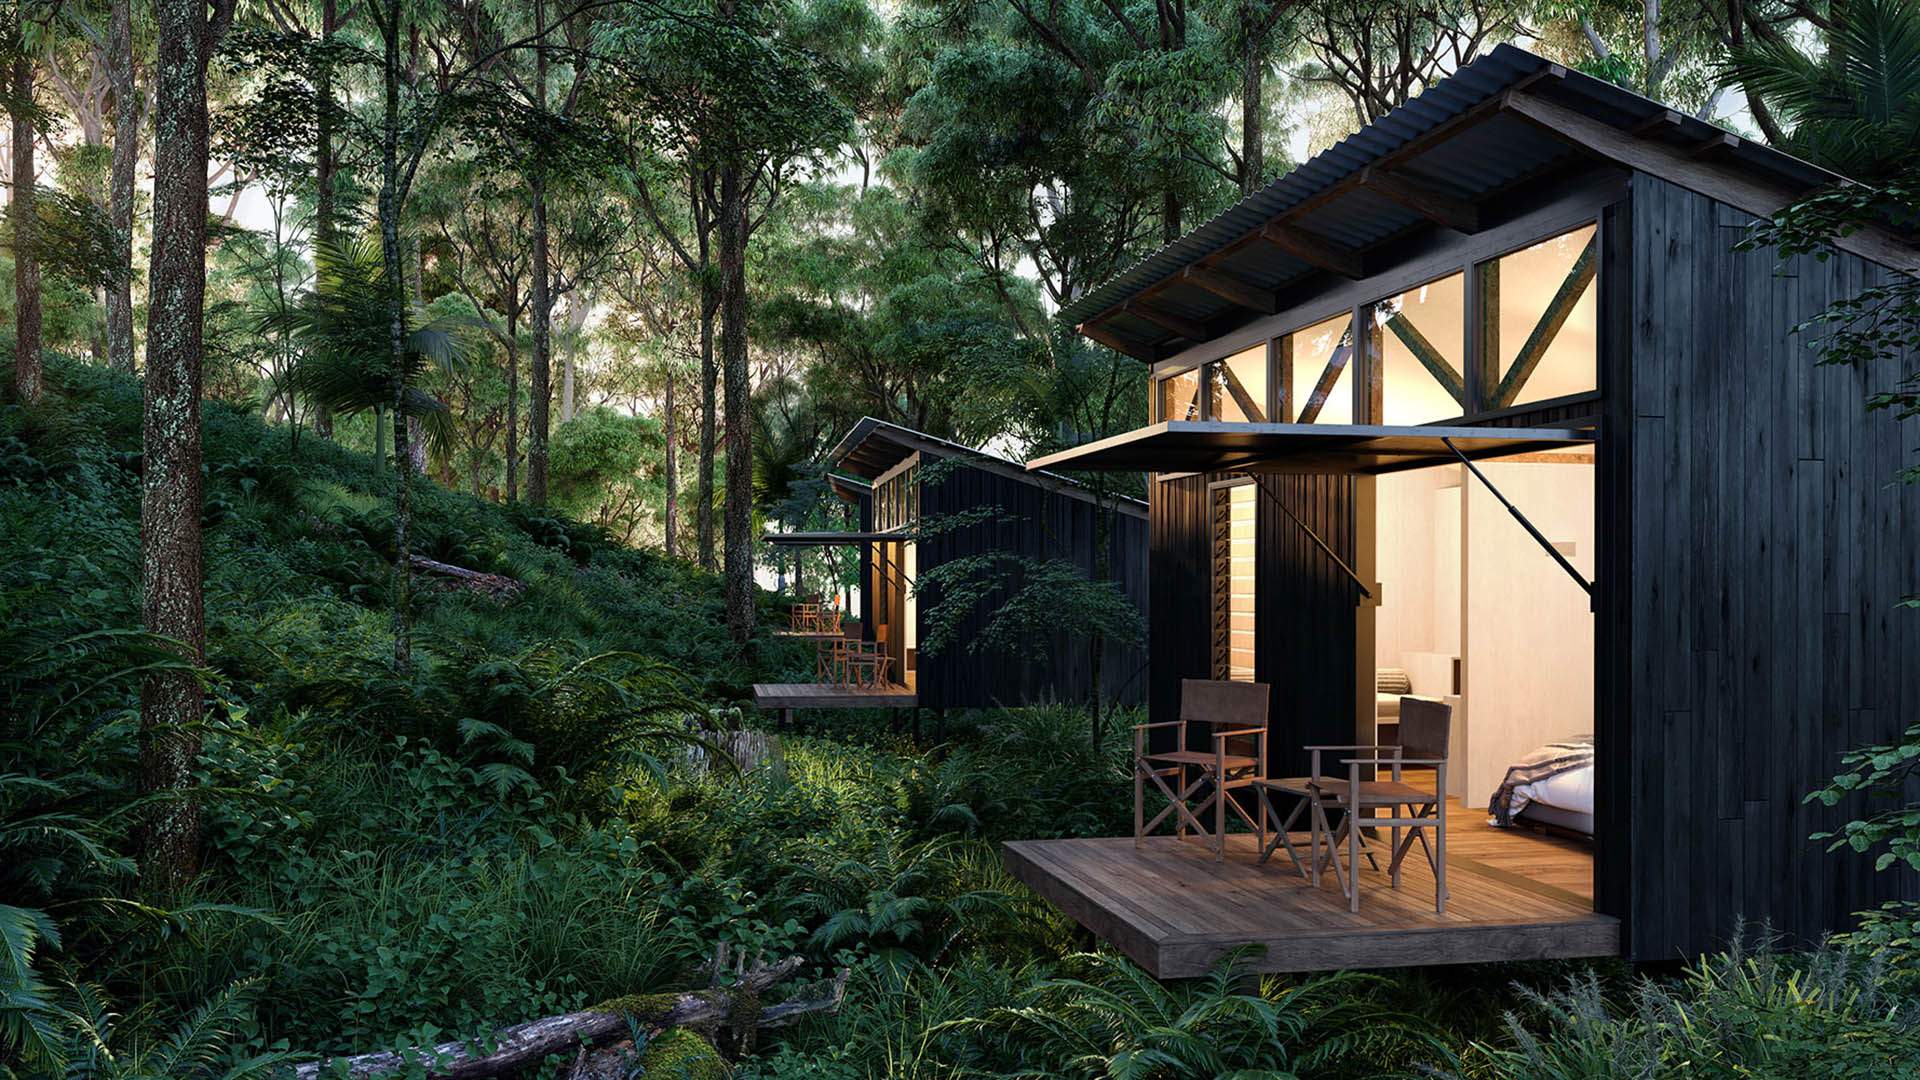 Southeast Queensland's Scenic Rim Will Soon Be Home to a New Walking Trail with Eco-Friendly Cabins